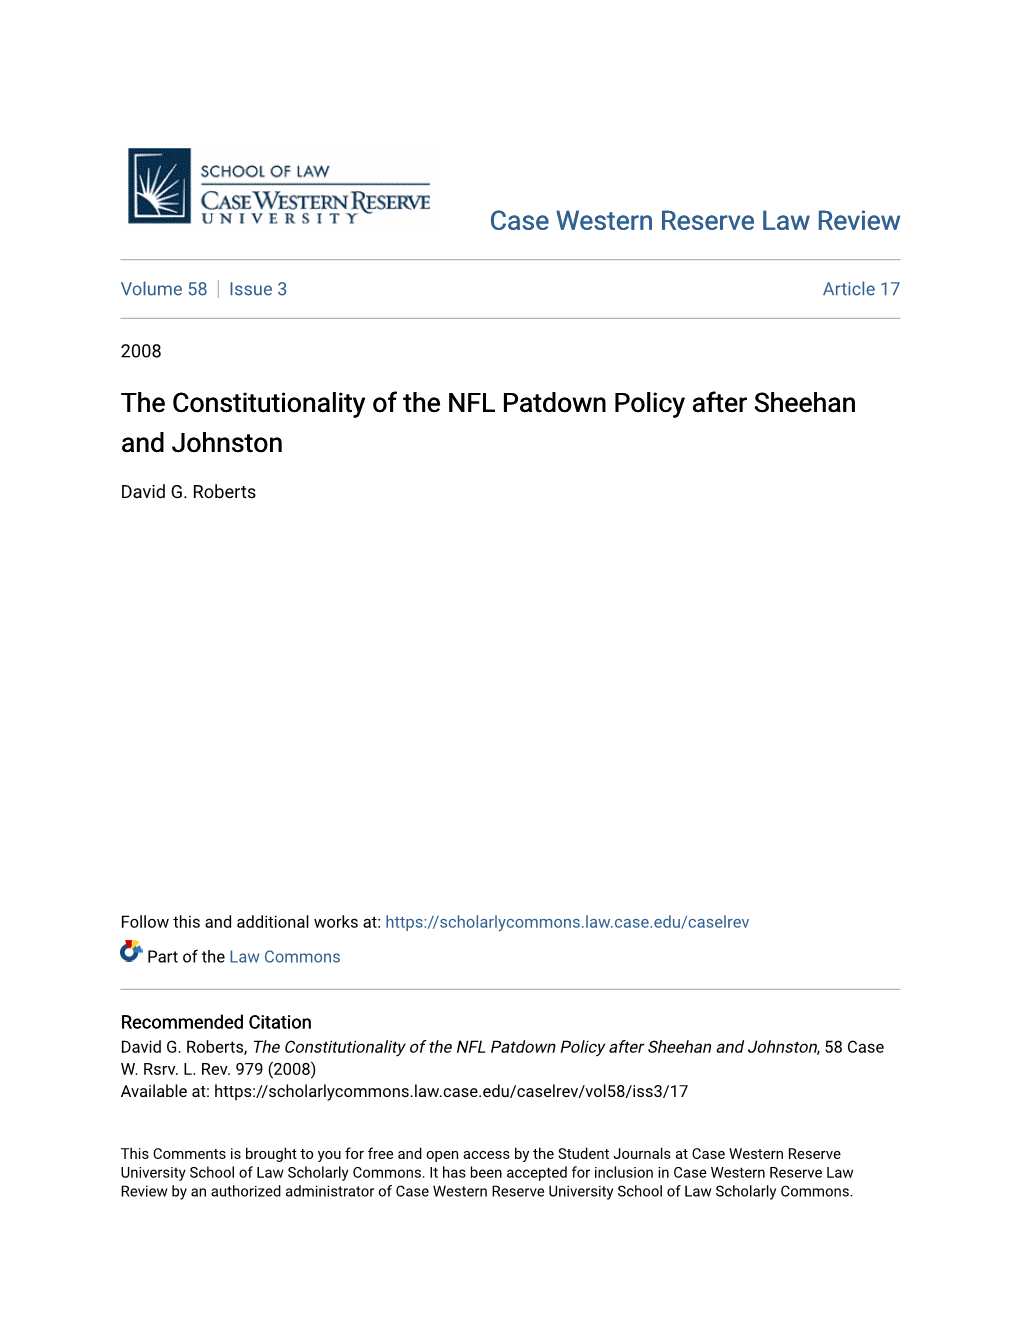 The Constitutionality of the NFL Patdown Policy After Sheehan and Johnston